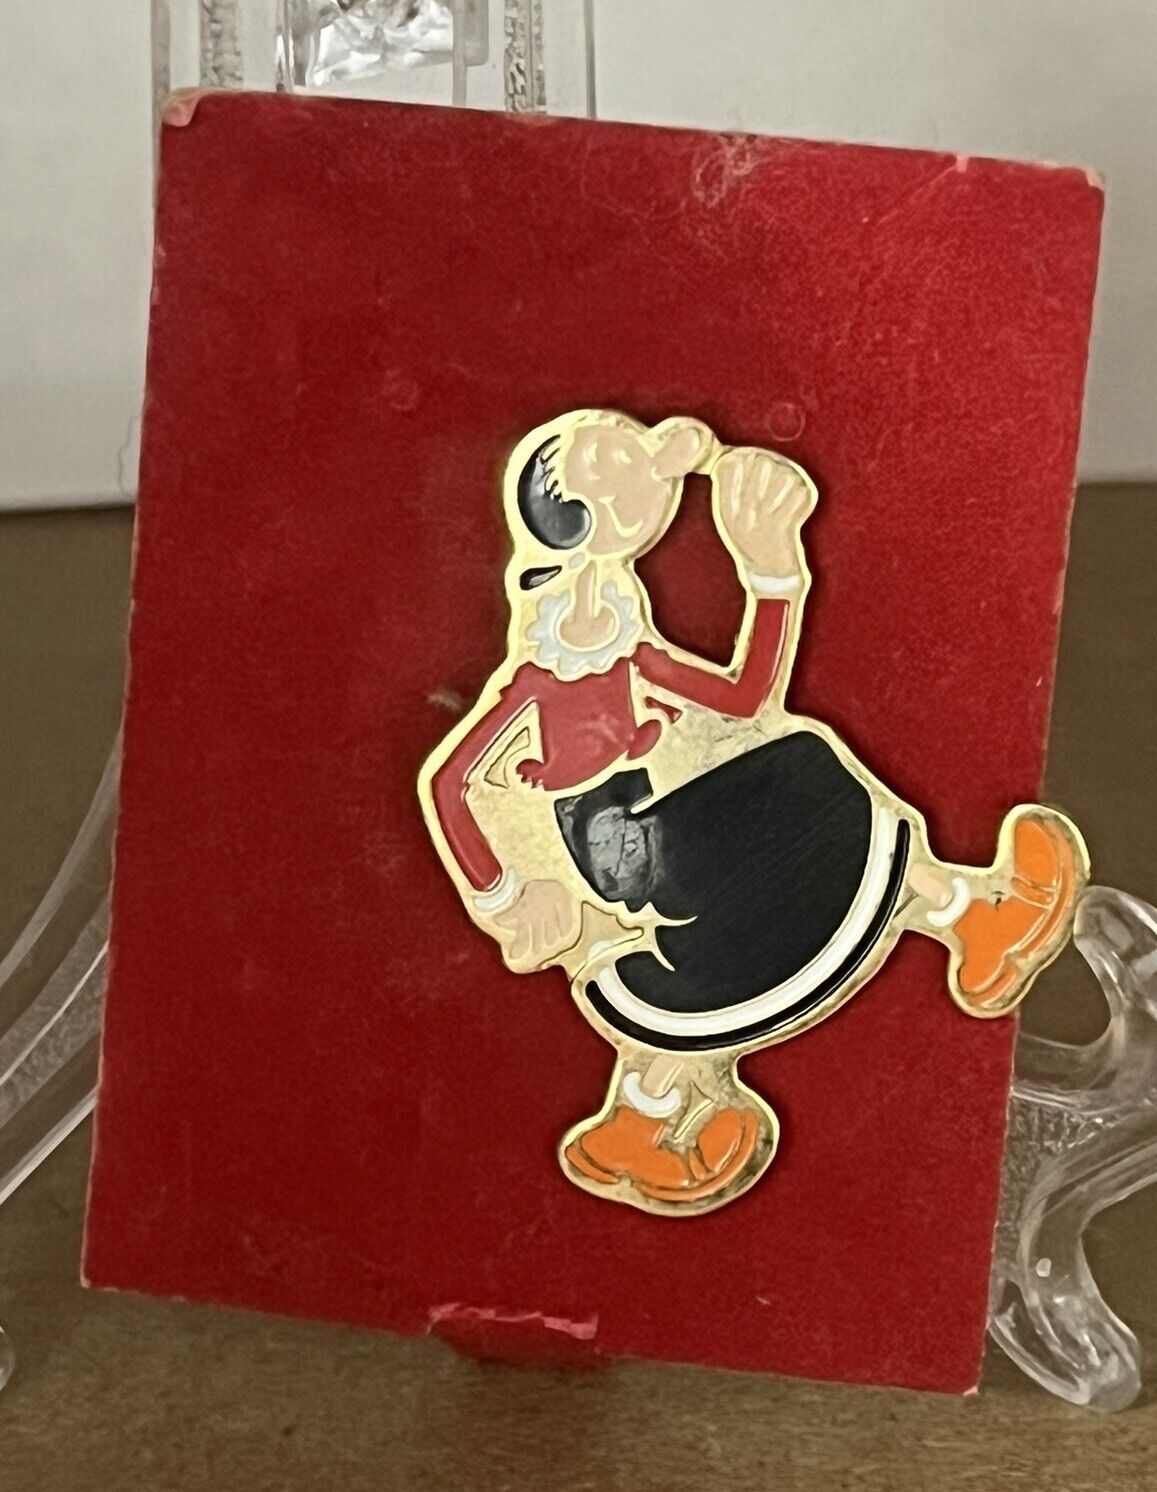 Vintage Popeye Olive Oyl 1” Gold Lapel Pin Cartoon King Features